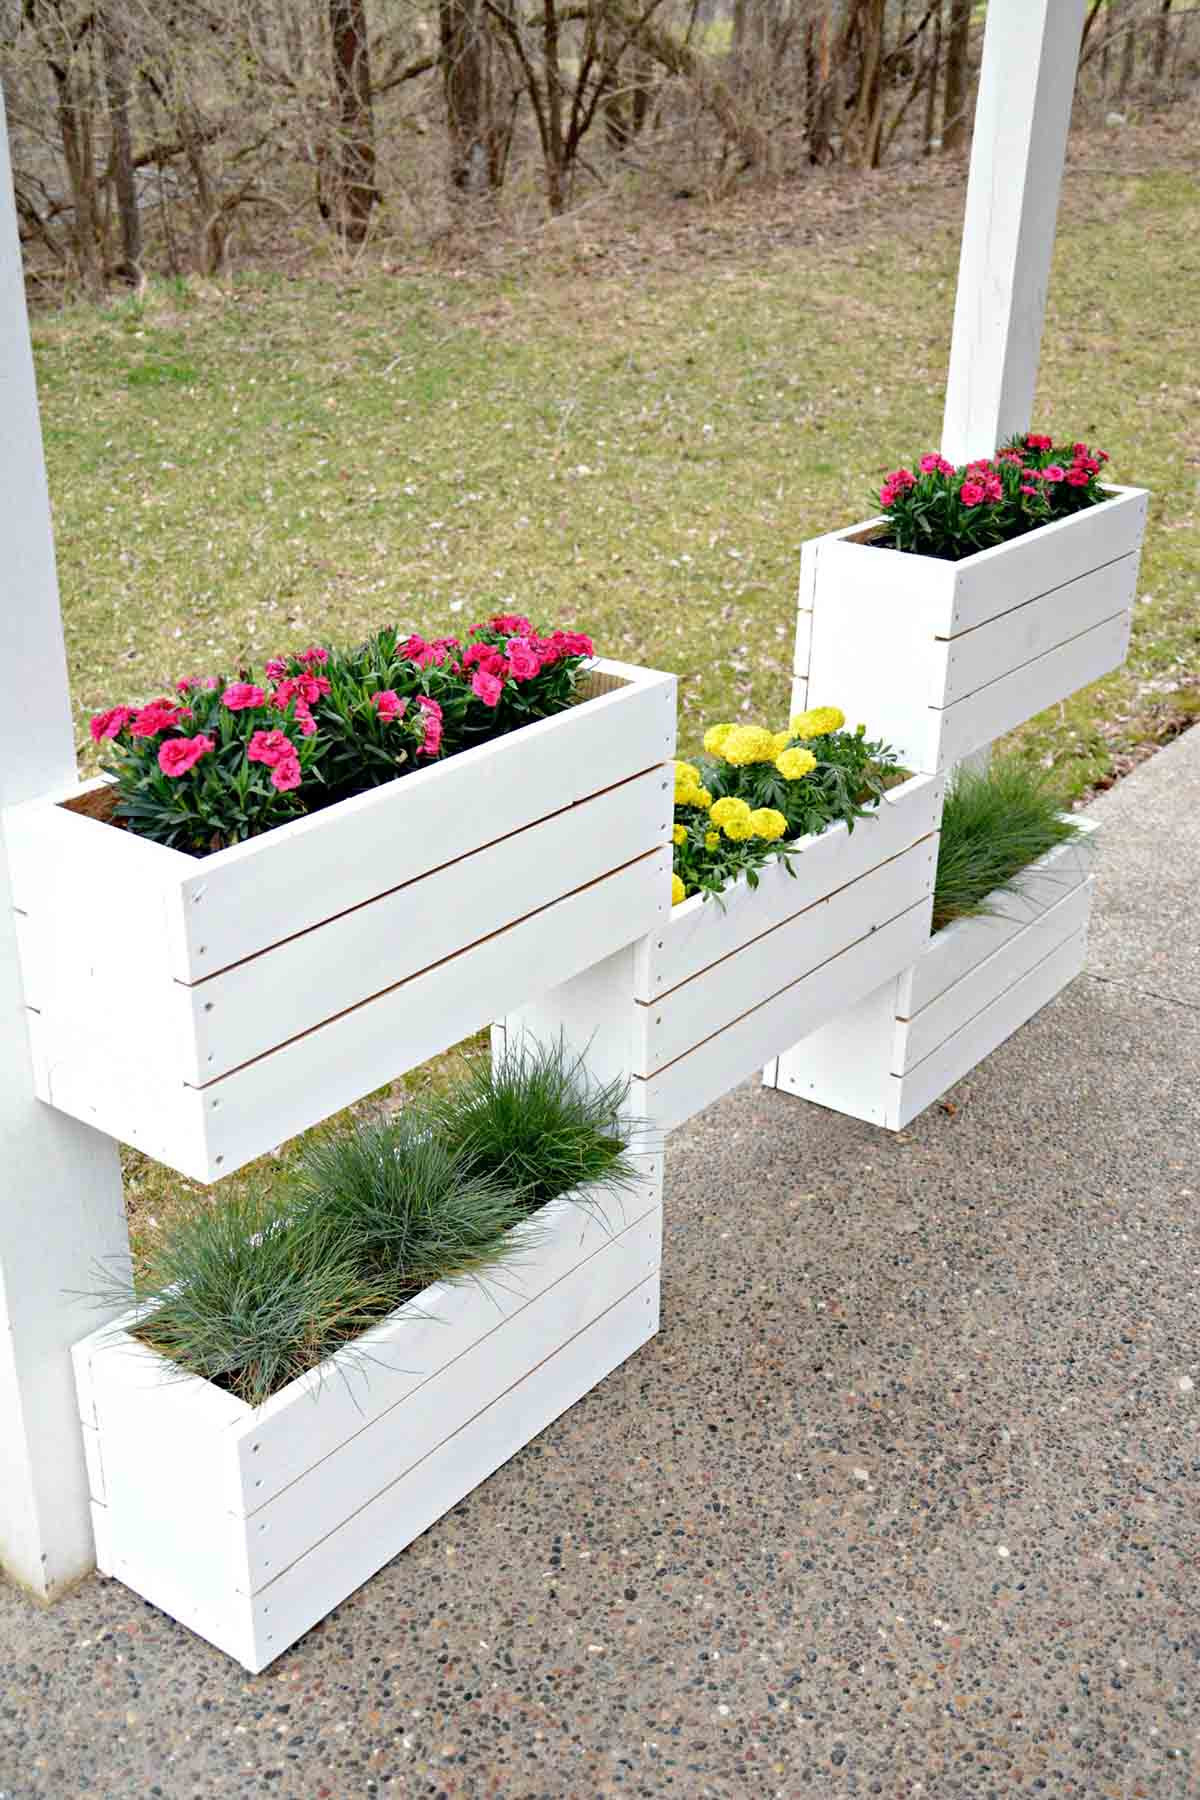 DIY Outdoor Planter Box
 32 Best DIY Pallet and Wood Planter Box Ideas and Designs